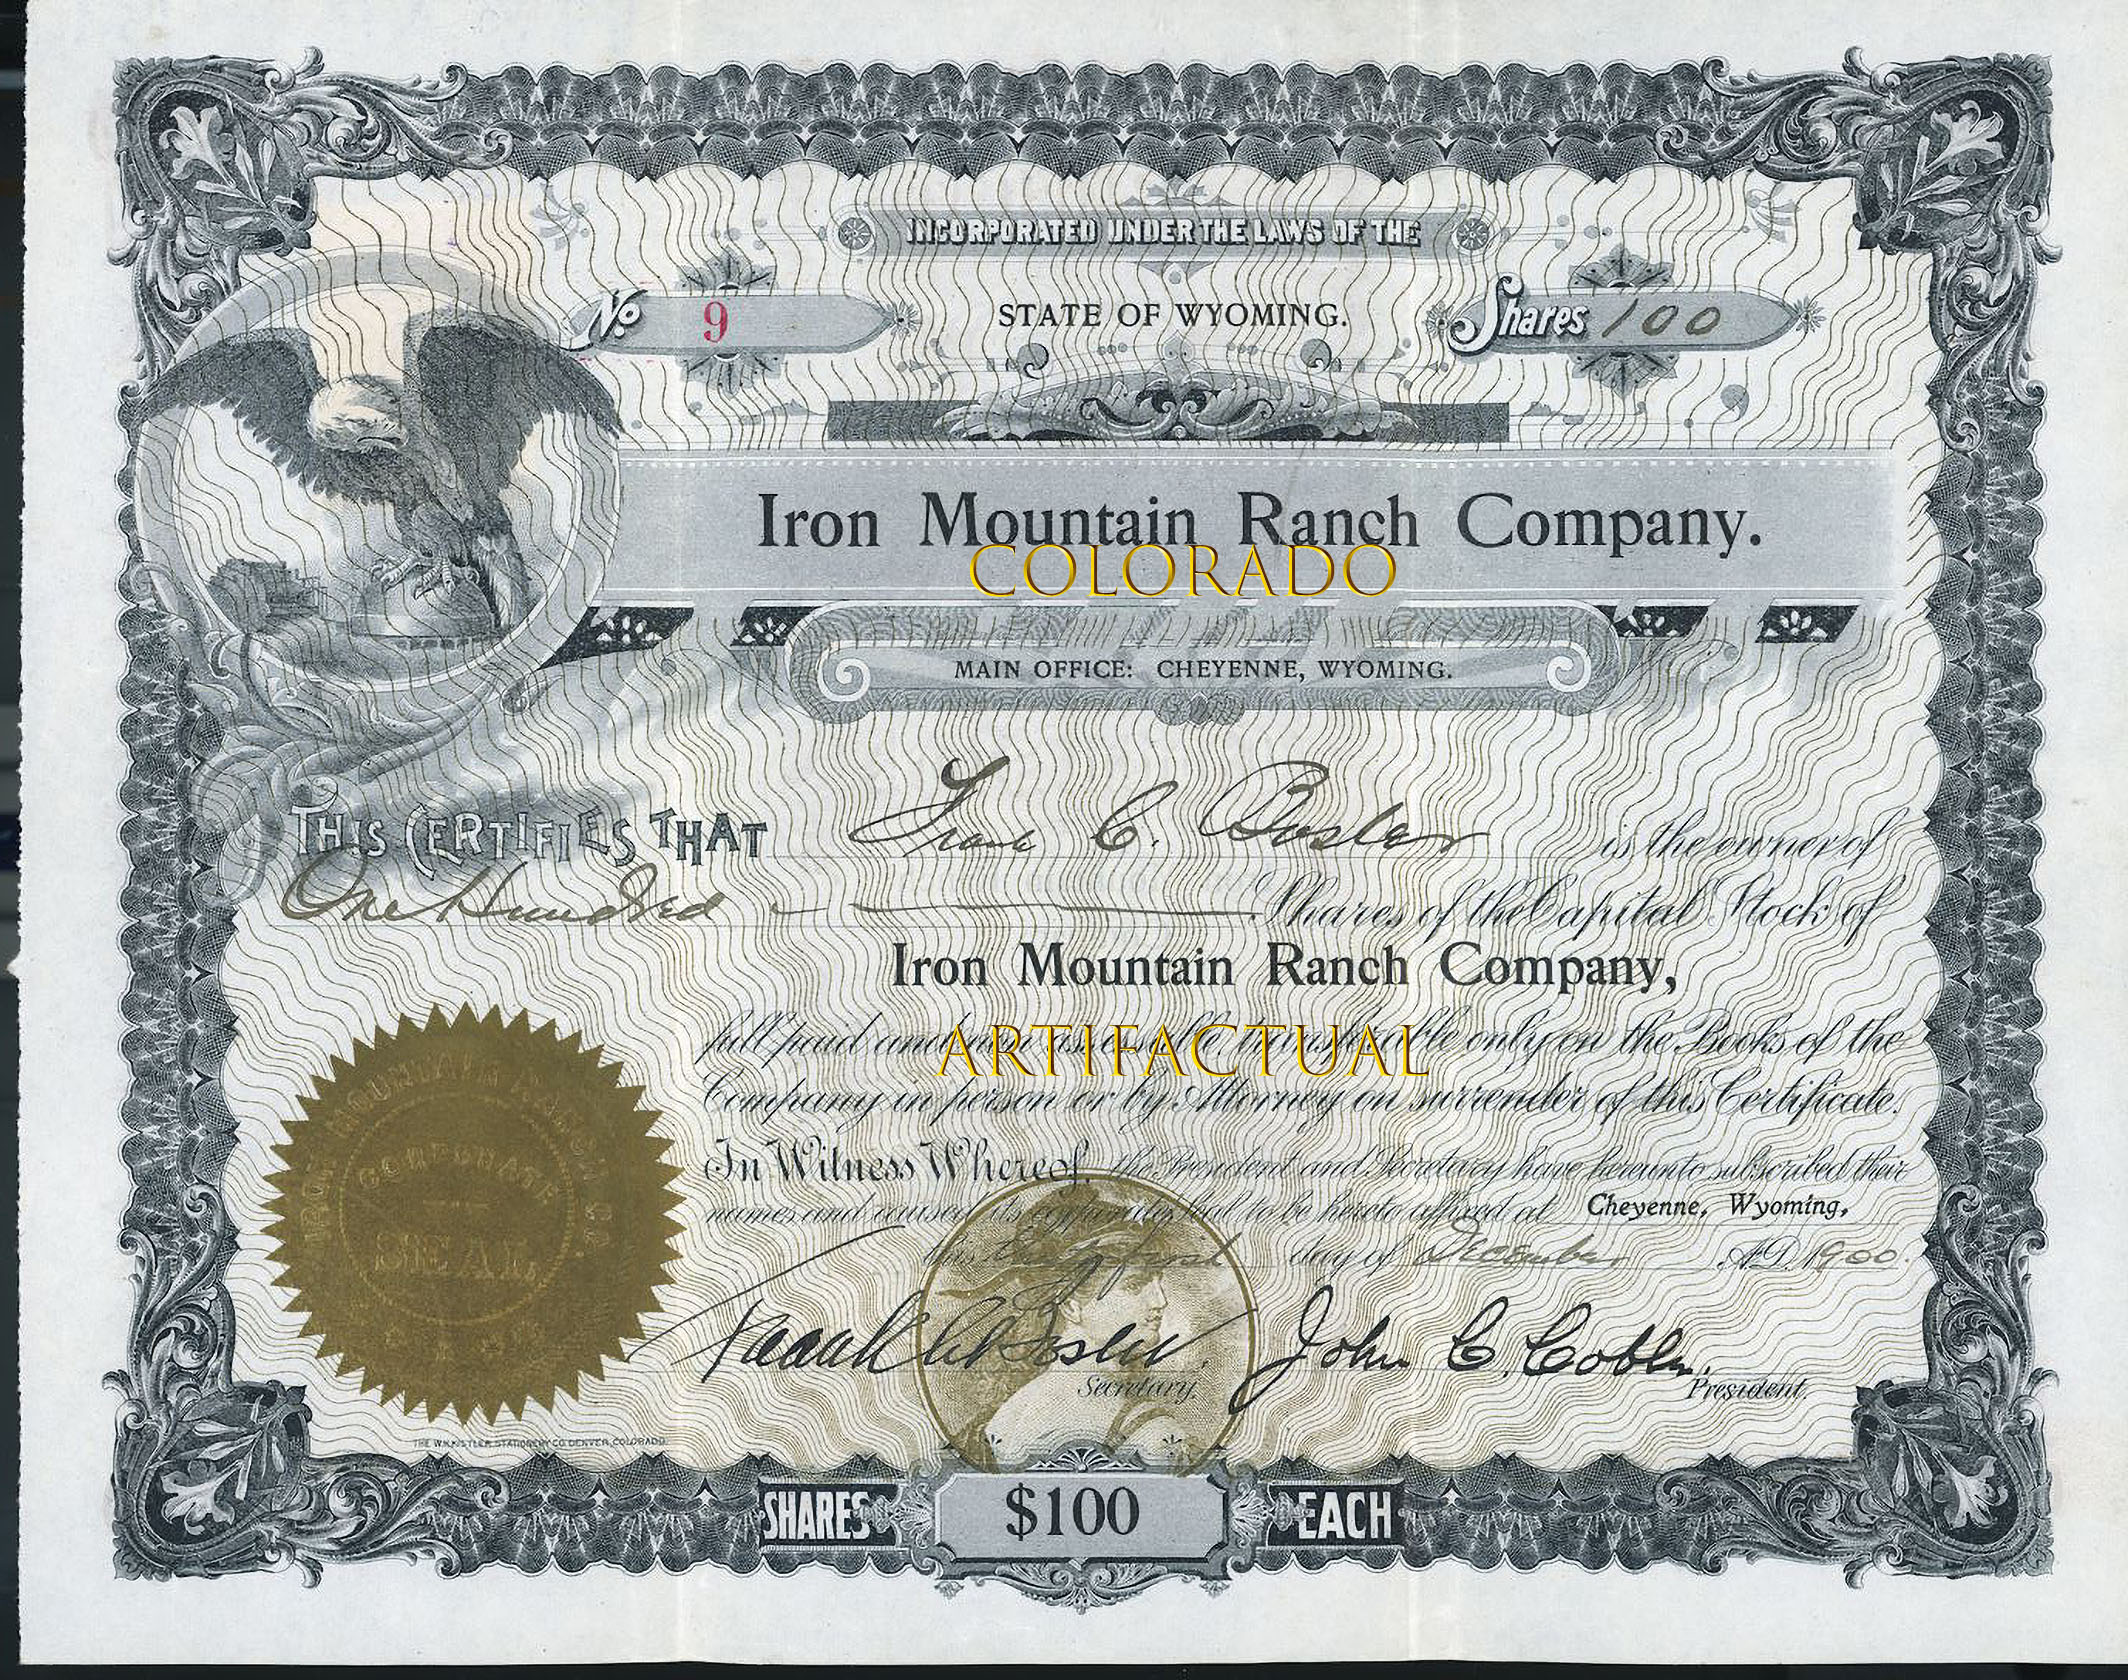 Iron Mountain Ranch Company stock certificate Tom Horn Wyoming cattle history 1900